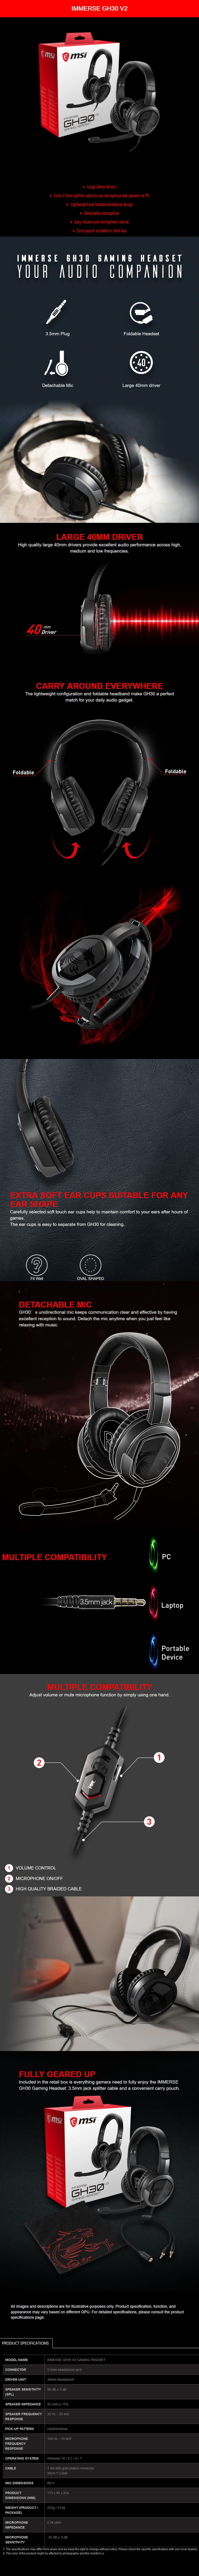 A large marketing image providing additional information about the product MSI Immerse GH30 V2 Wired Gaming Headset - Additional alt info not provided